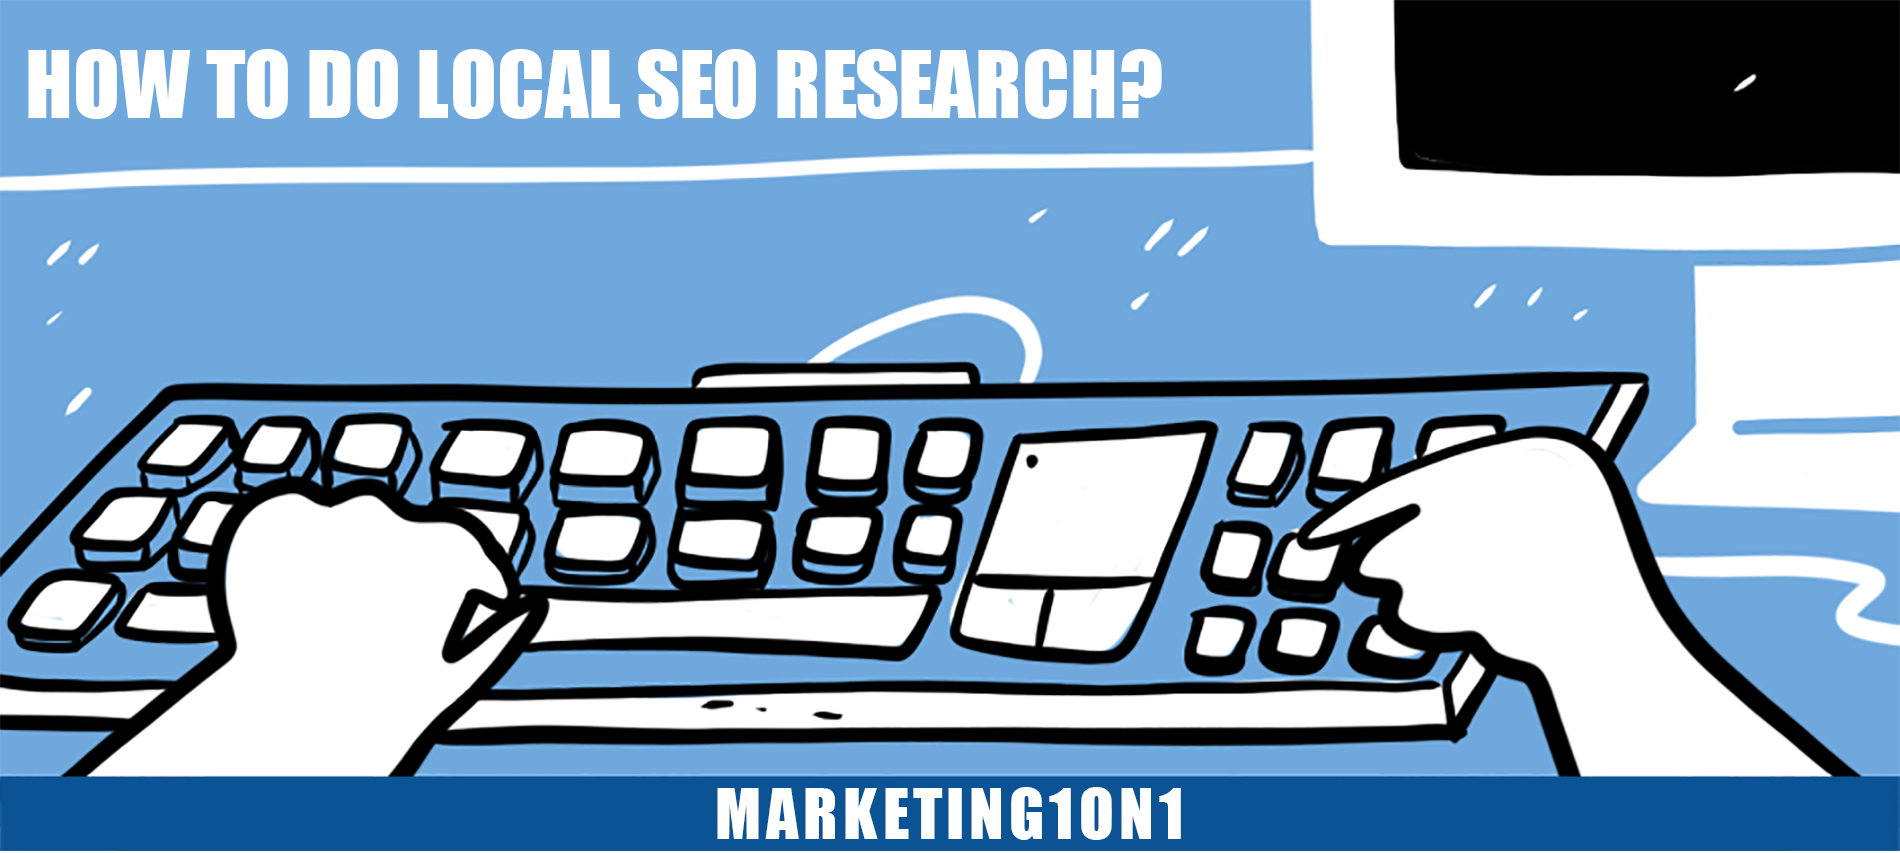 How to do local SEO research?